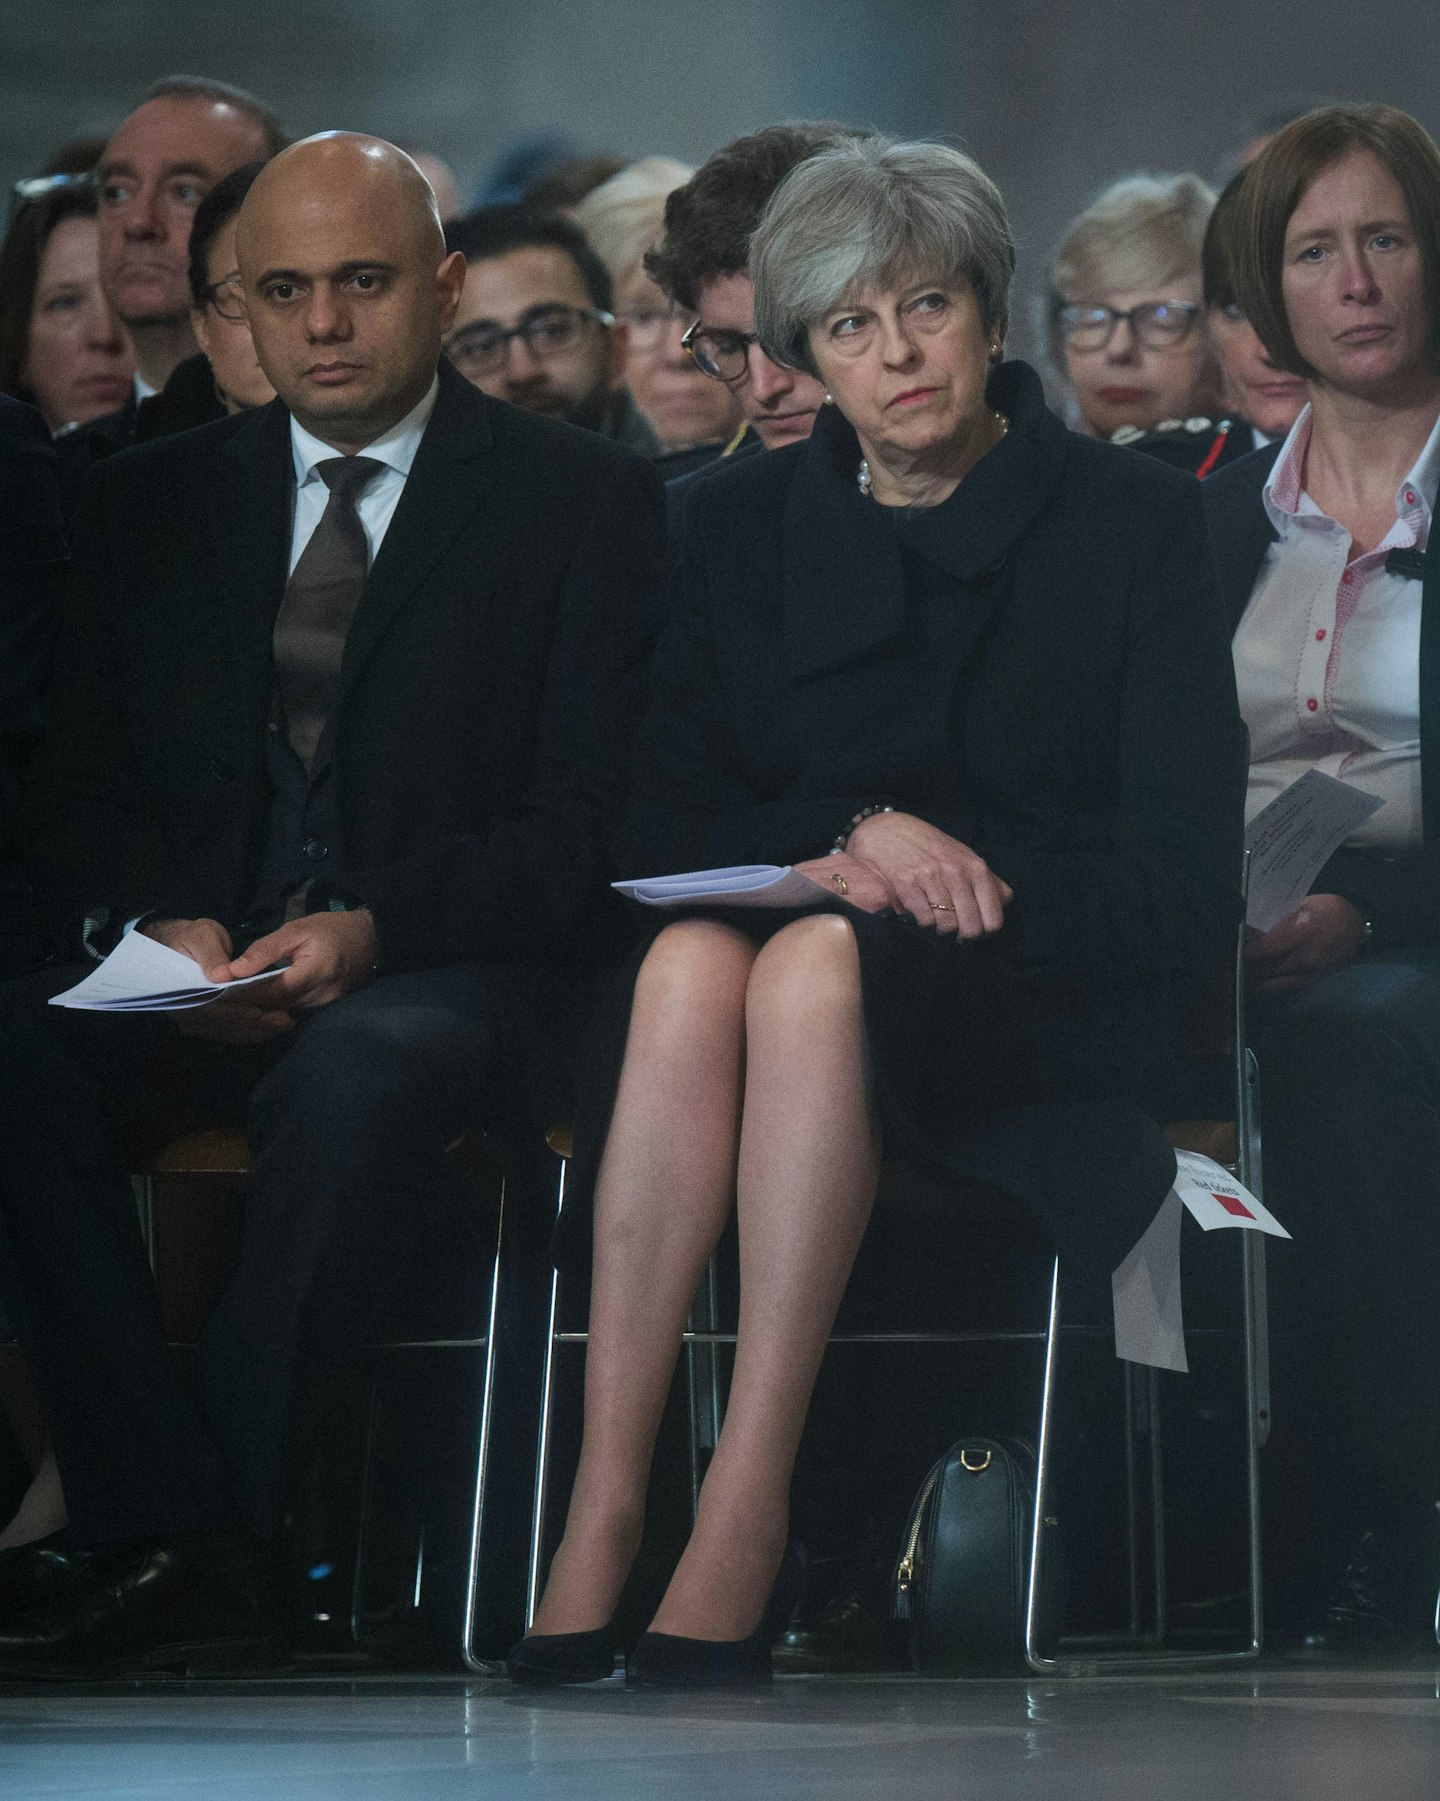 Theresa May's defining moments as Prime Minister - Grazia